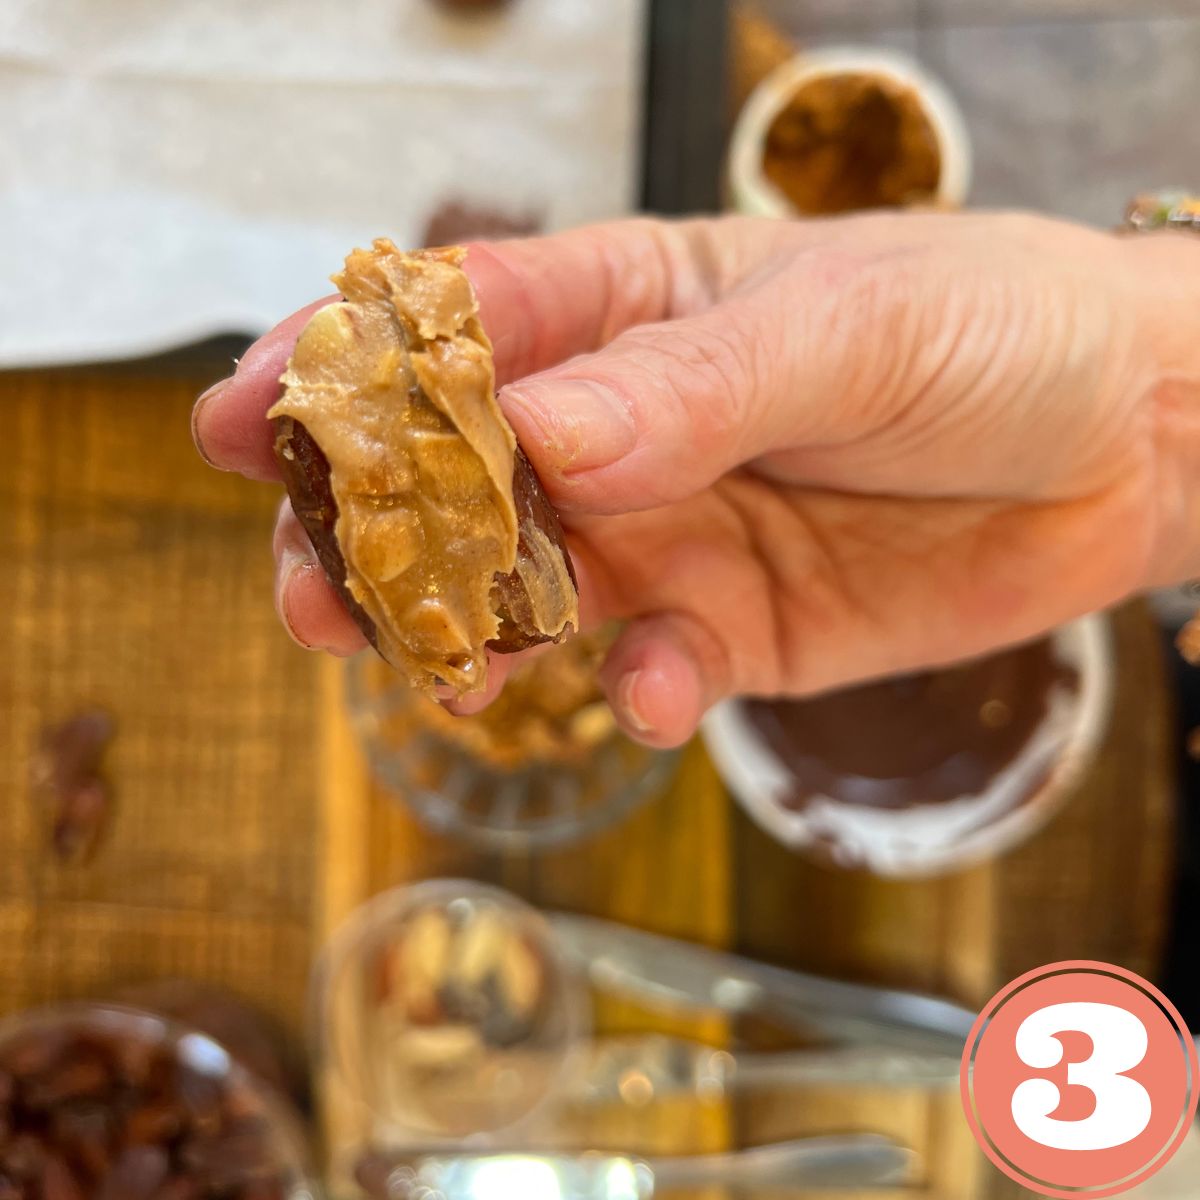 A hand holding a homemade snickers bar made with dates covered in nut butter